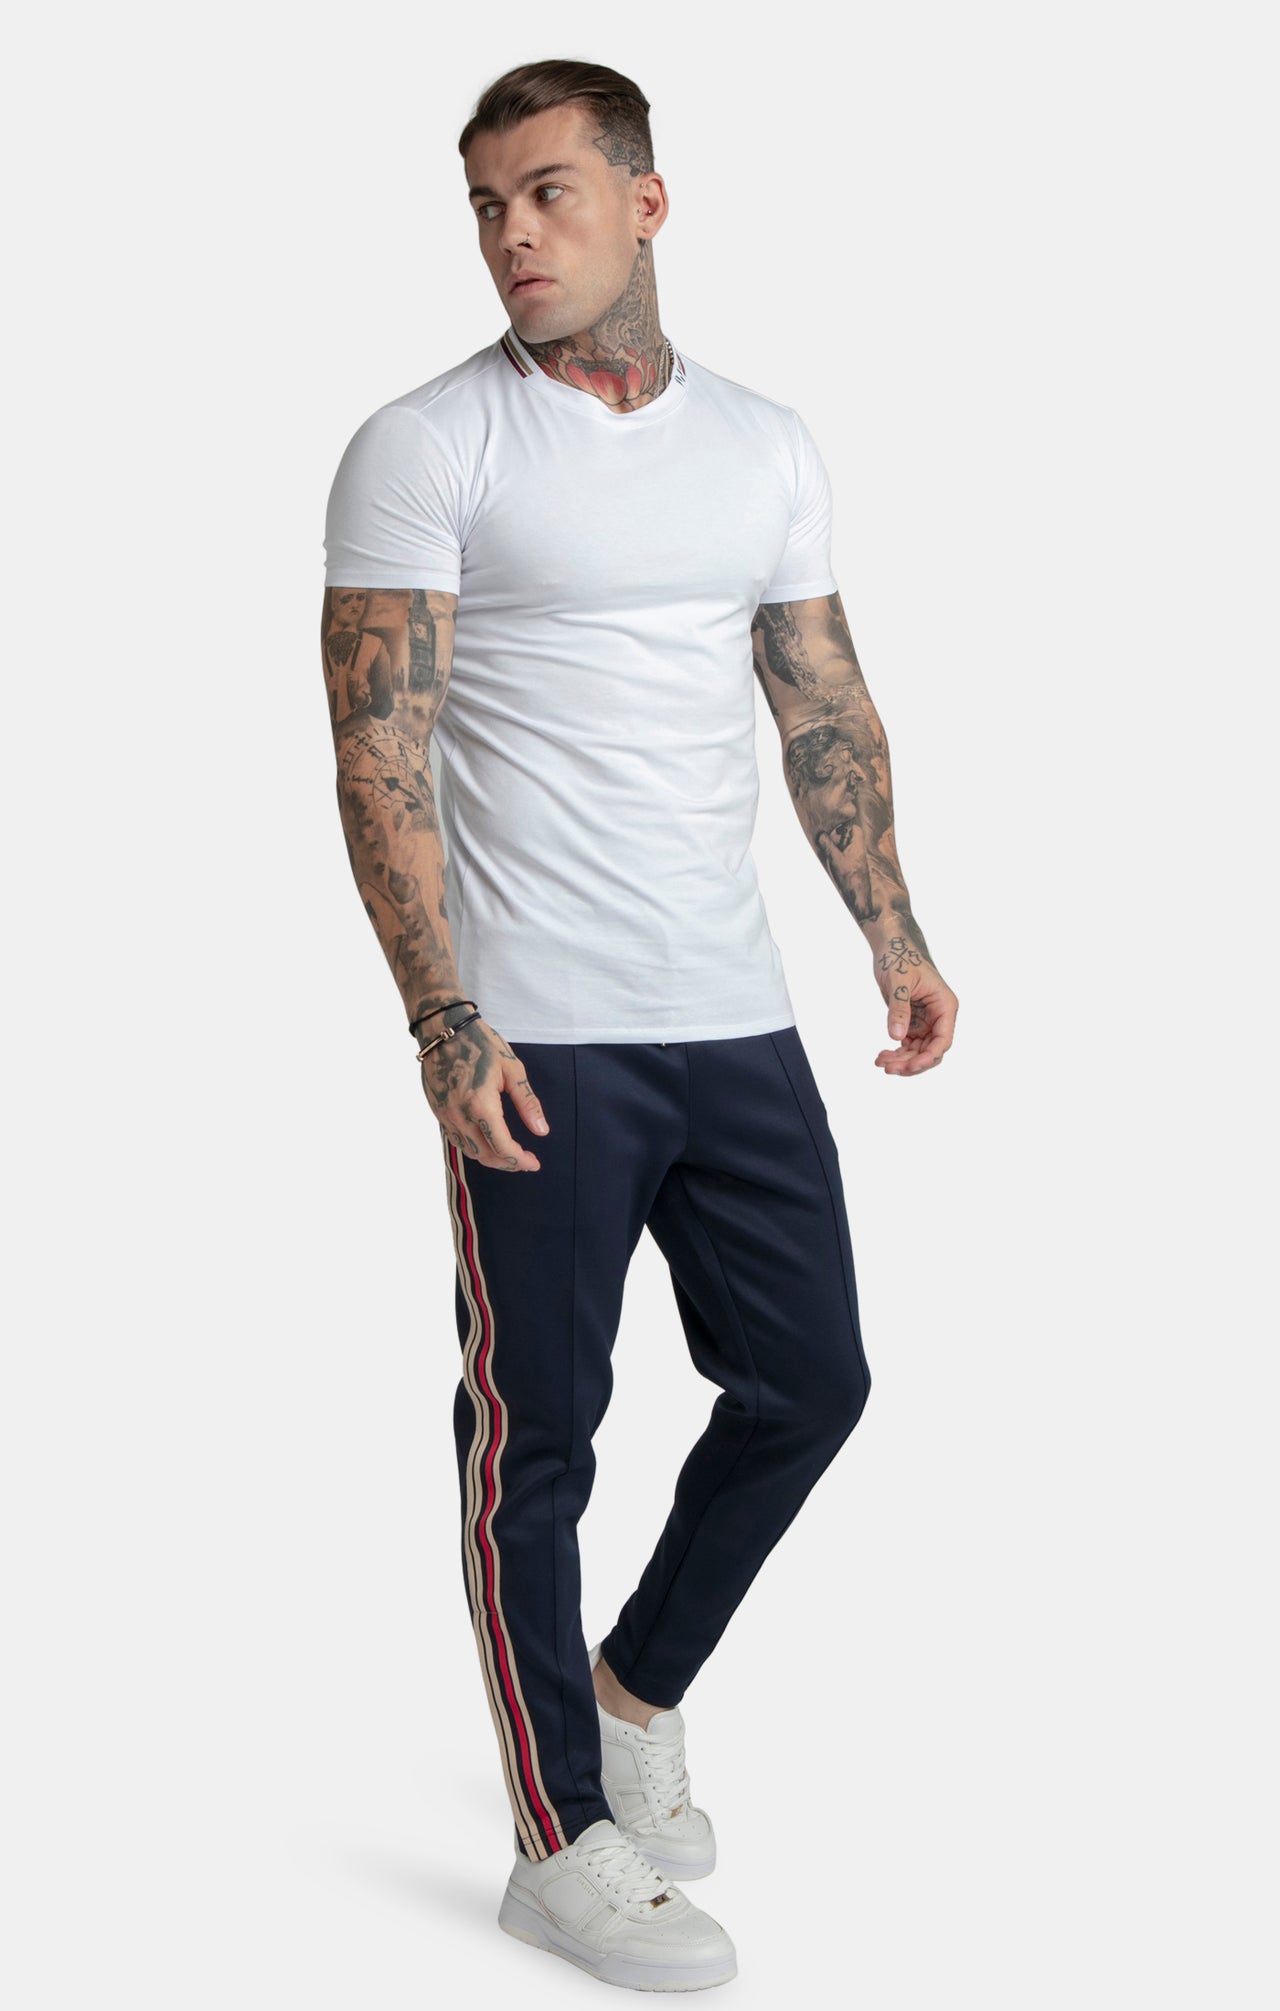 Messi x SikSilk White Muscle Fit T-Shirt (2)